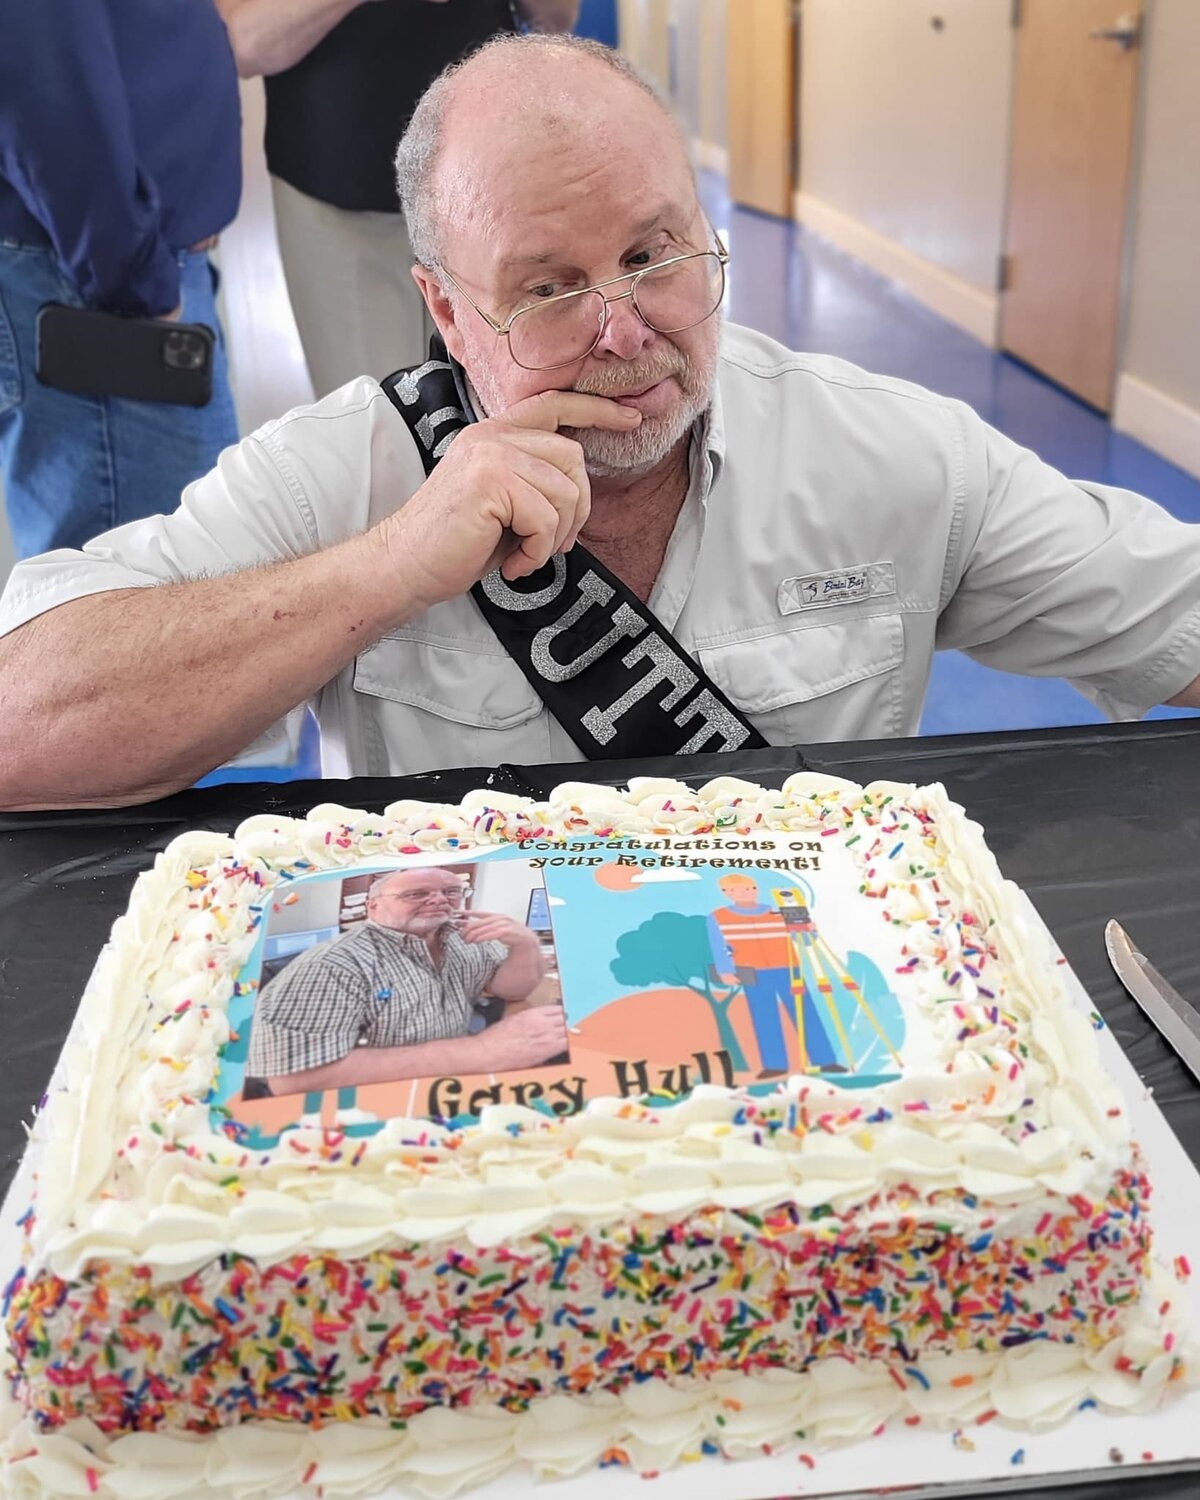 LABELLE -- on Sept. 28, city staff, friends, and family gathered to celebrate the retirement of Gary Hull who served as the Superintendent of Public Works.